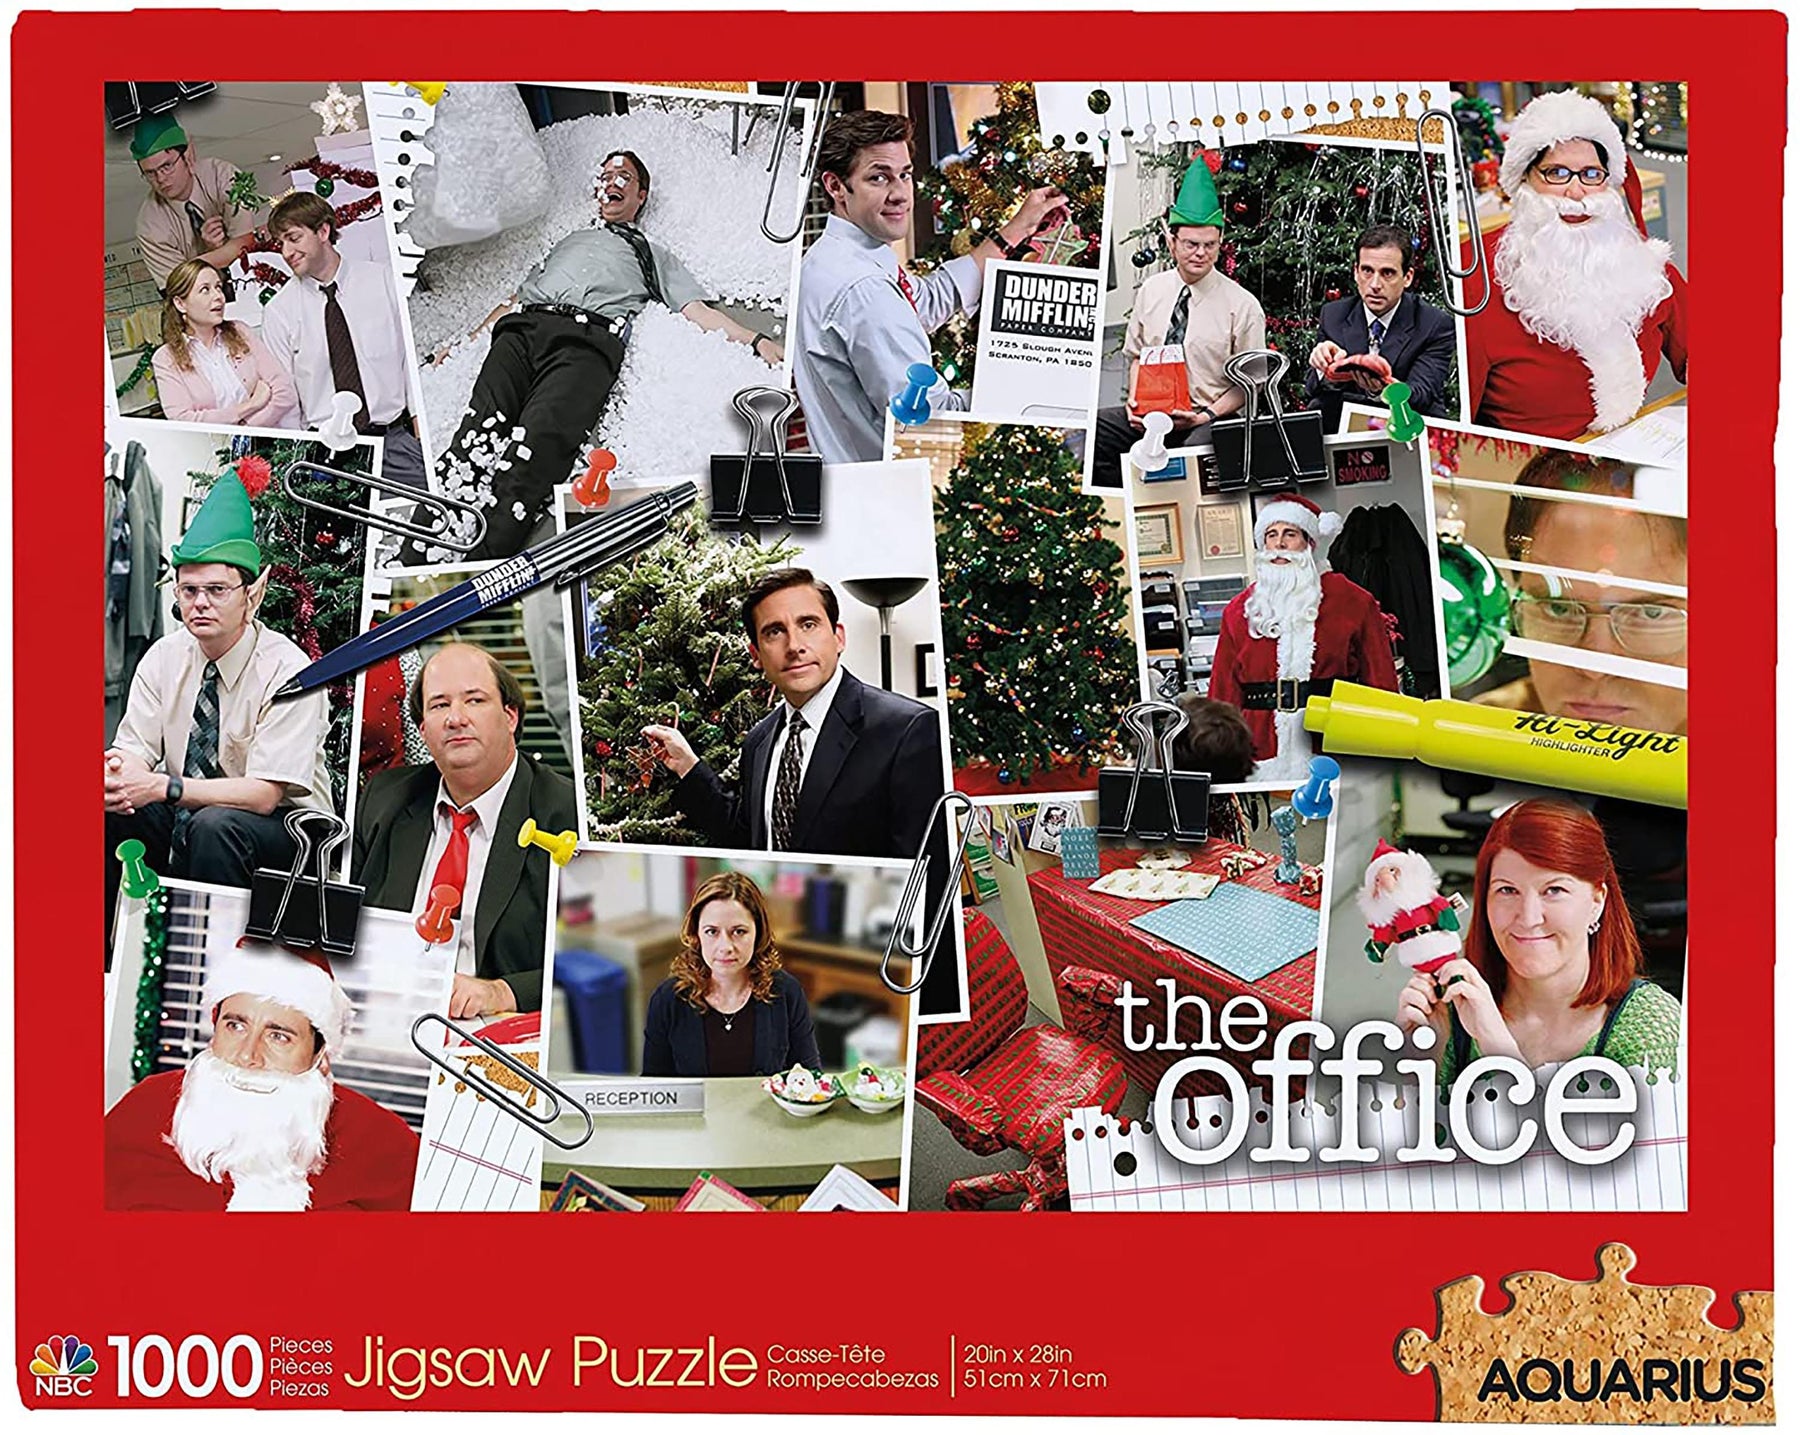 The Office Christmas 1000 Piece Jigsaw Puzzle.